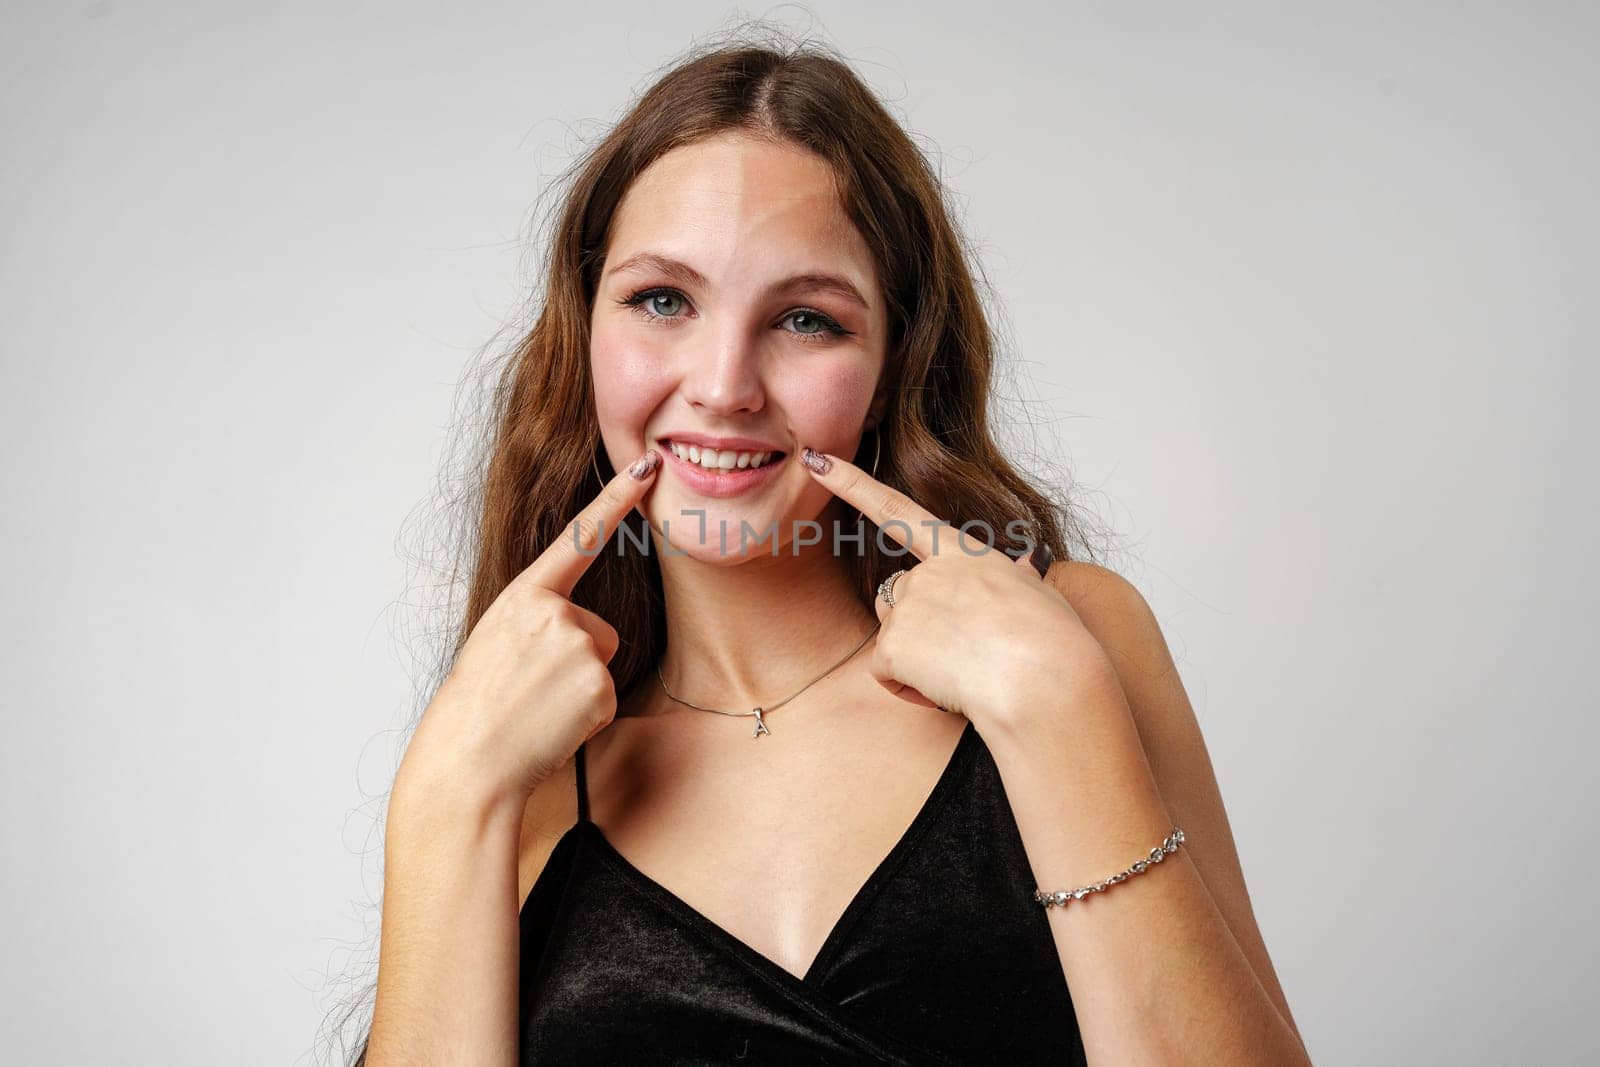 Smiling Young Woman Posing in a Black Dress Against a Grey Background by Fabrikasimf